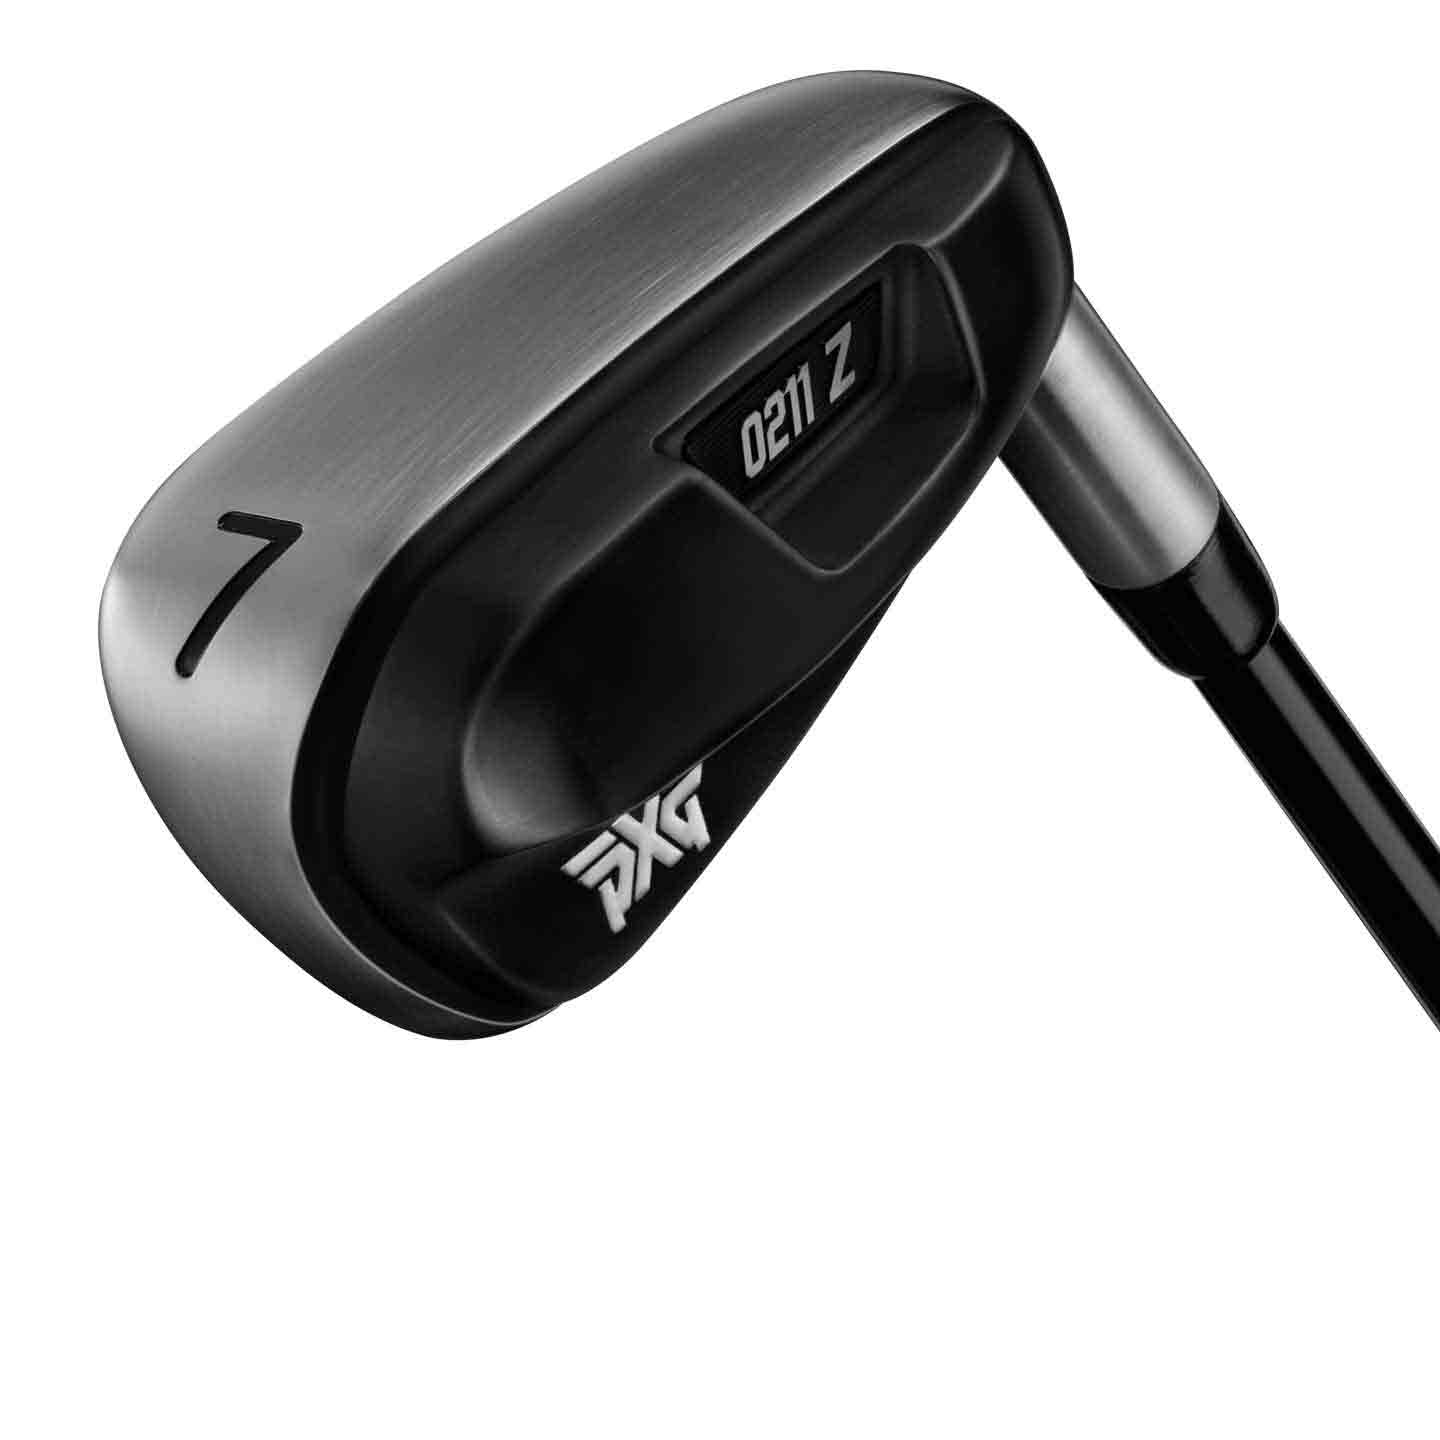 7 PXG irons and reviewed: ClubTest 2022